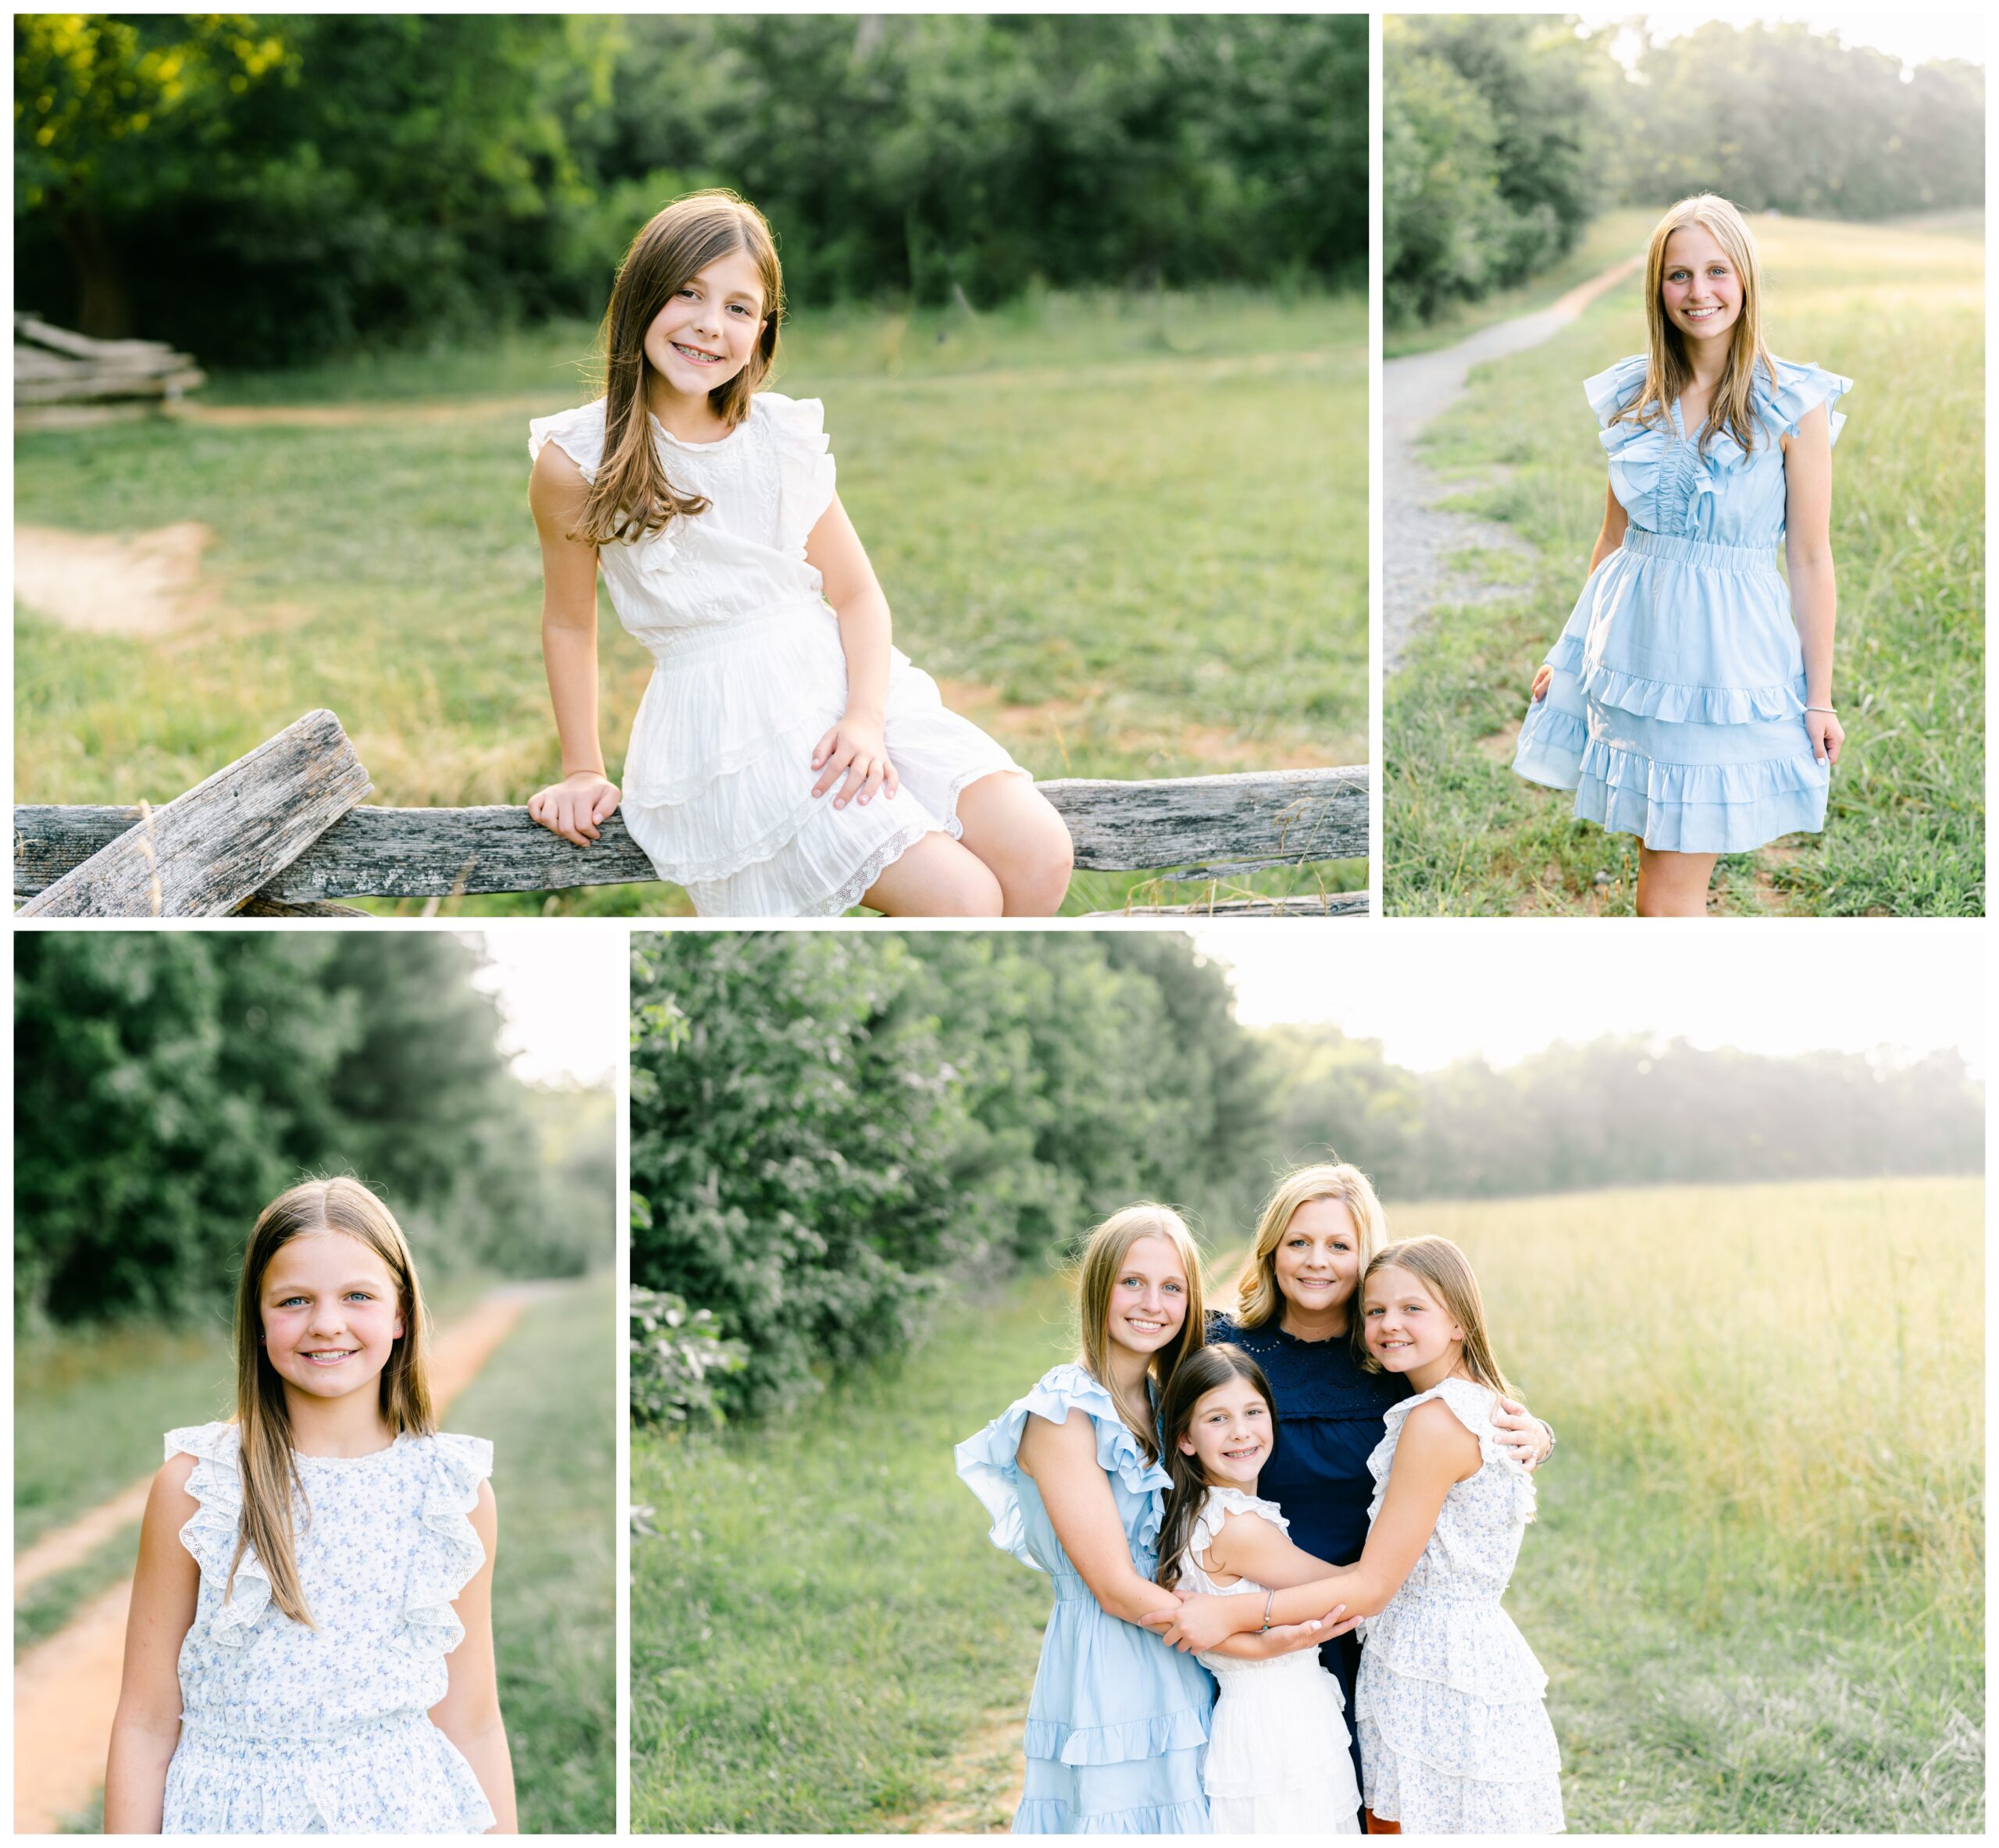 Professional portraits of three sisters in a rustic green field.